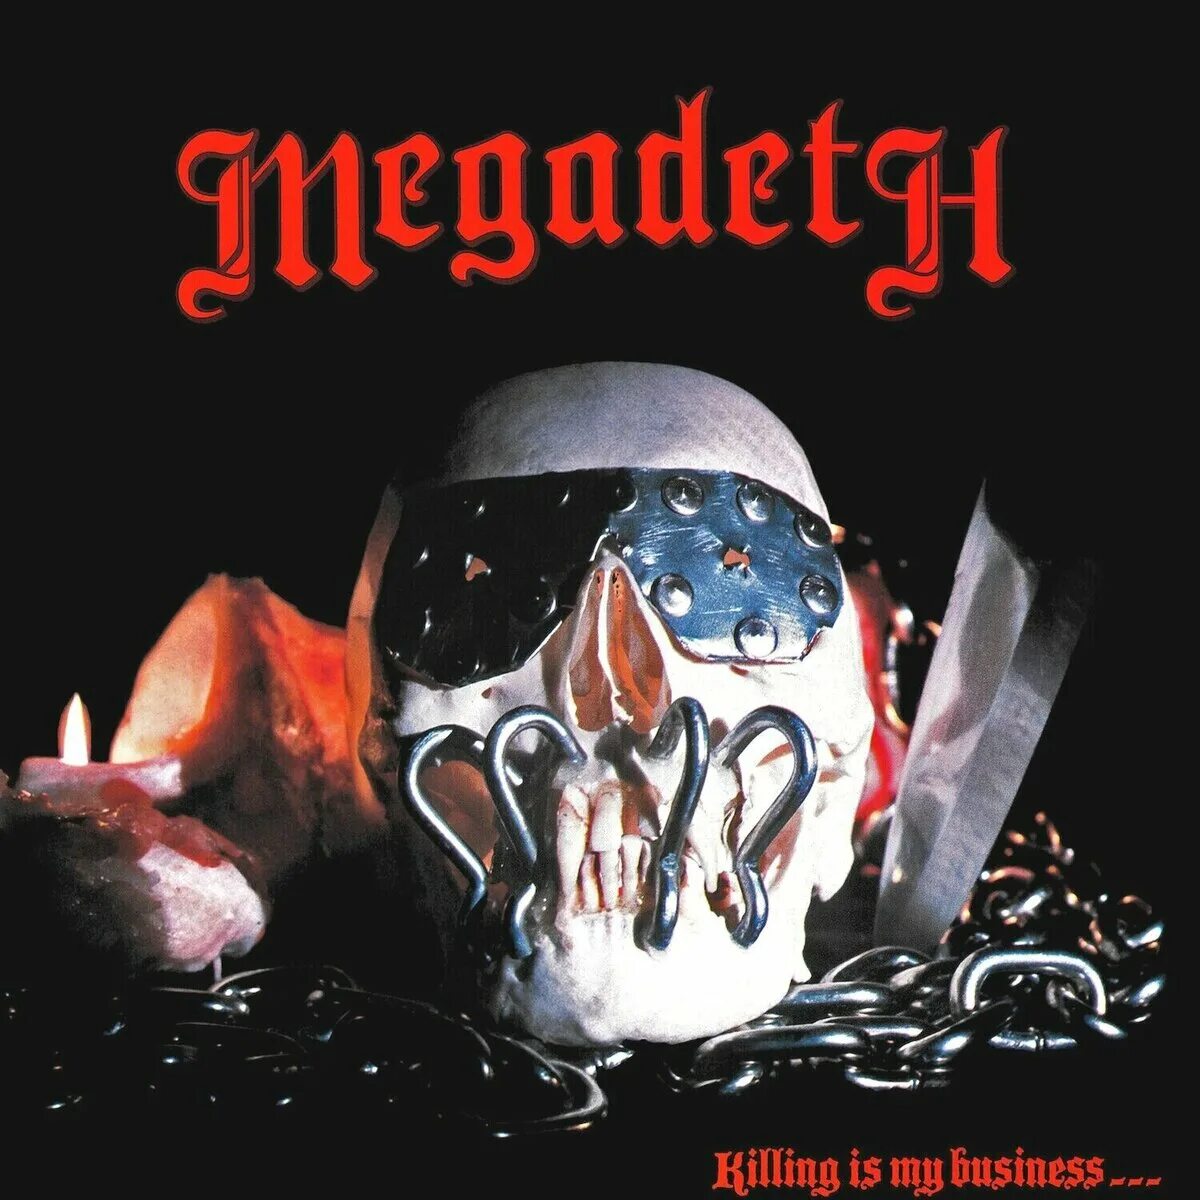 Megadeth Killing is my Business and Business is good 1985. Megadeth 1985.